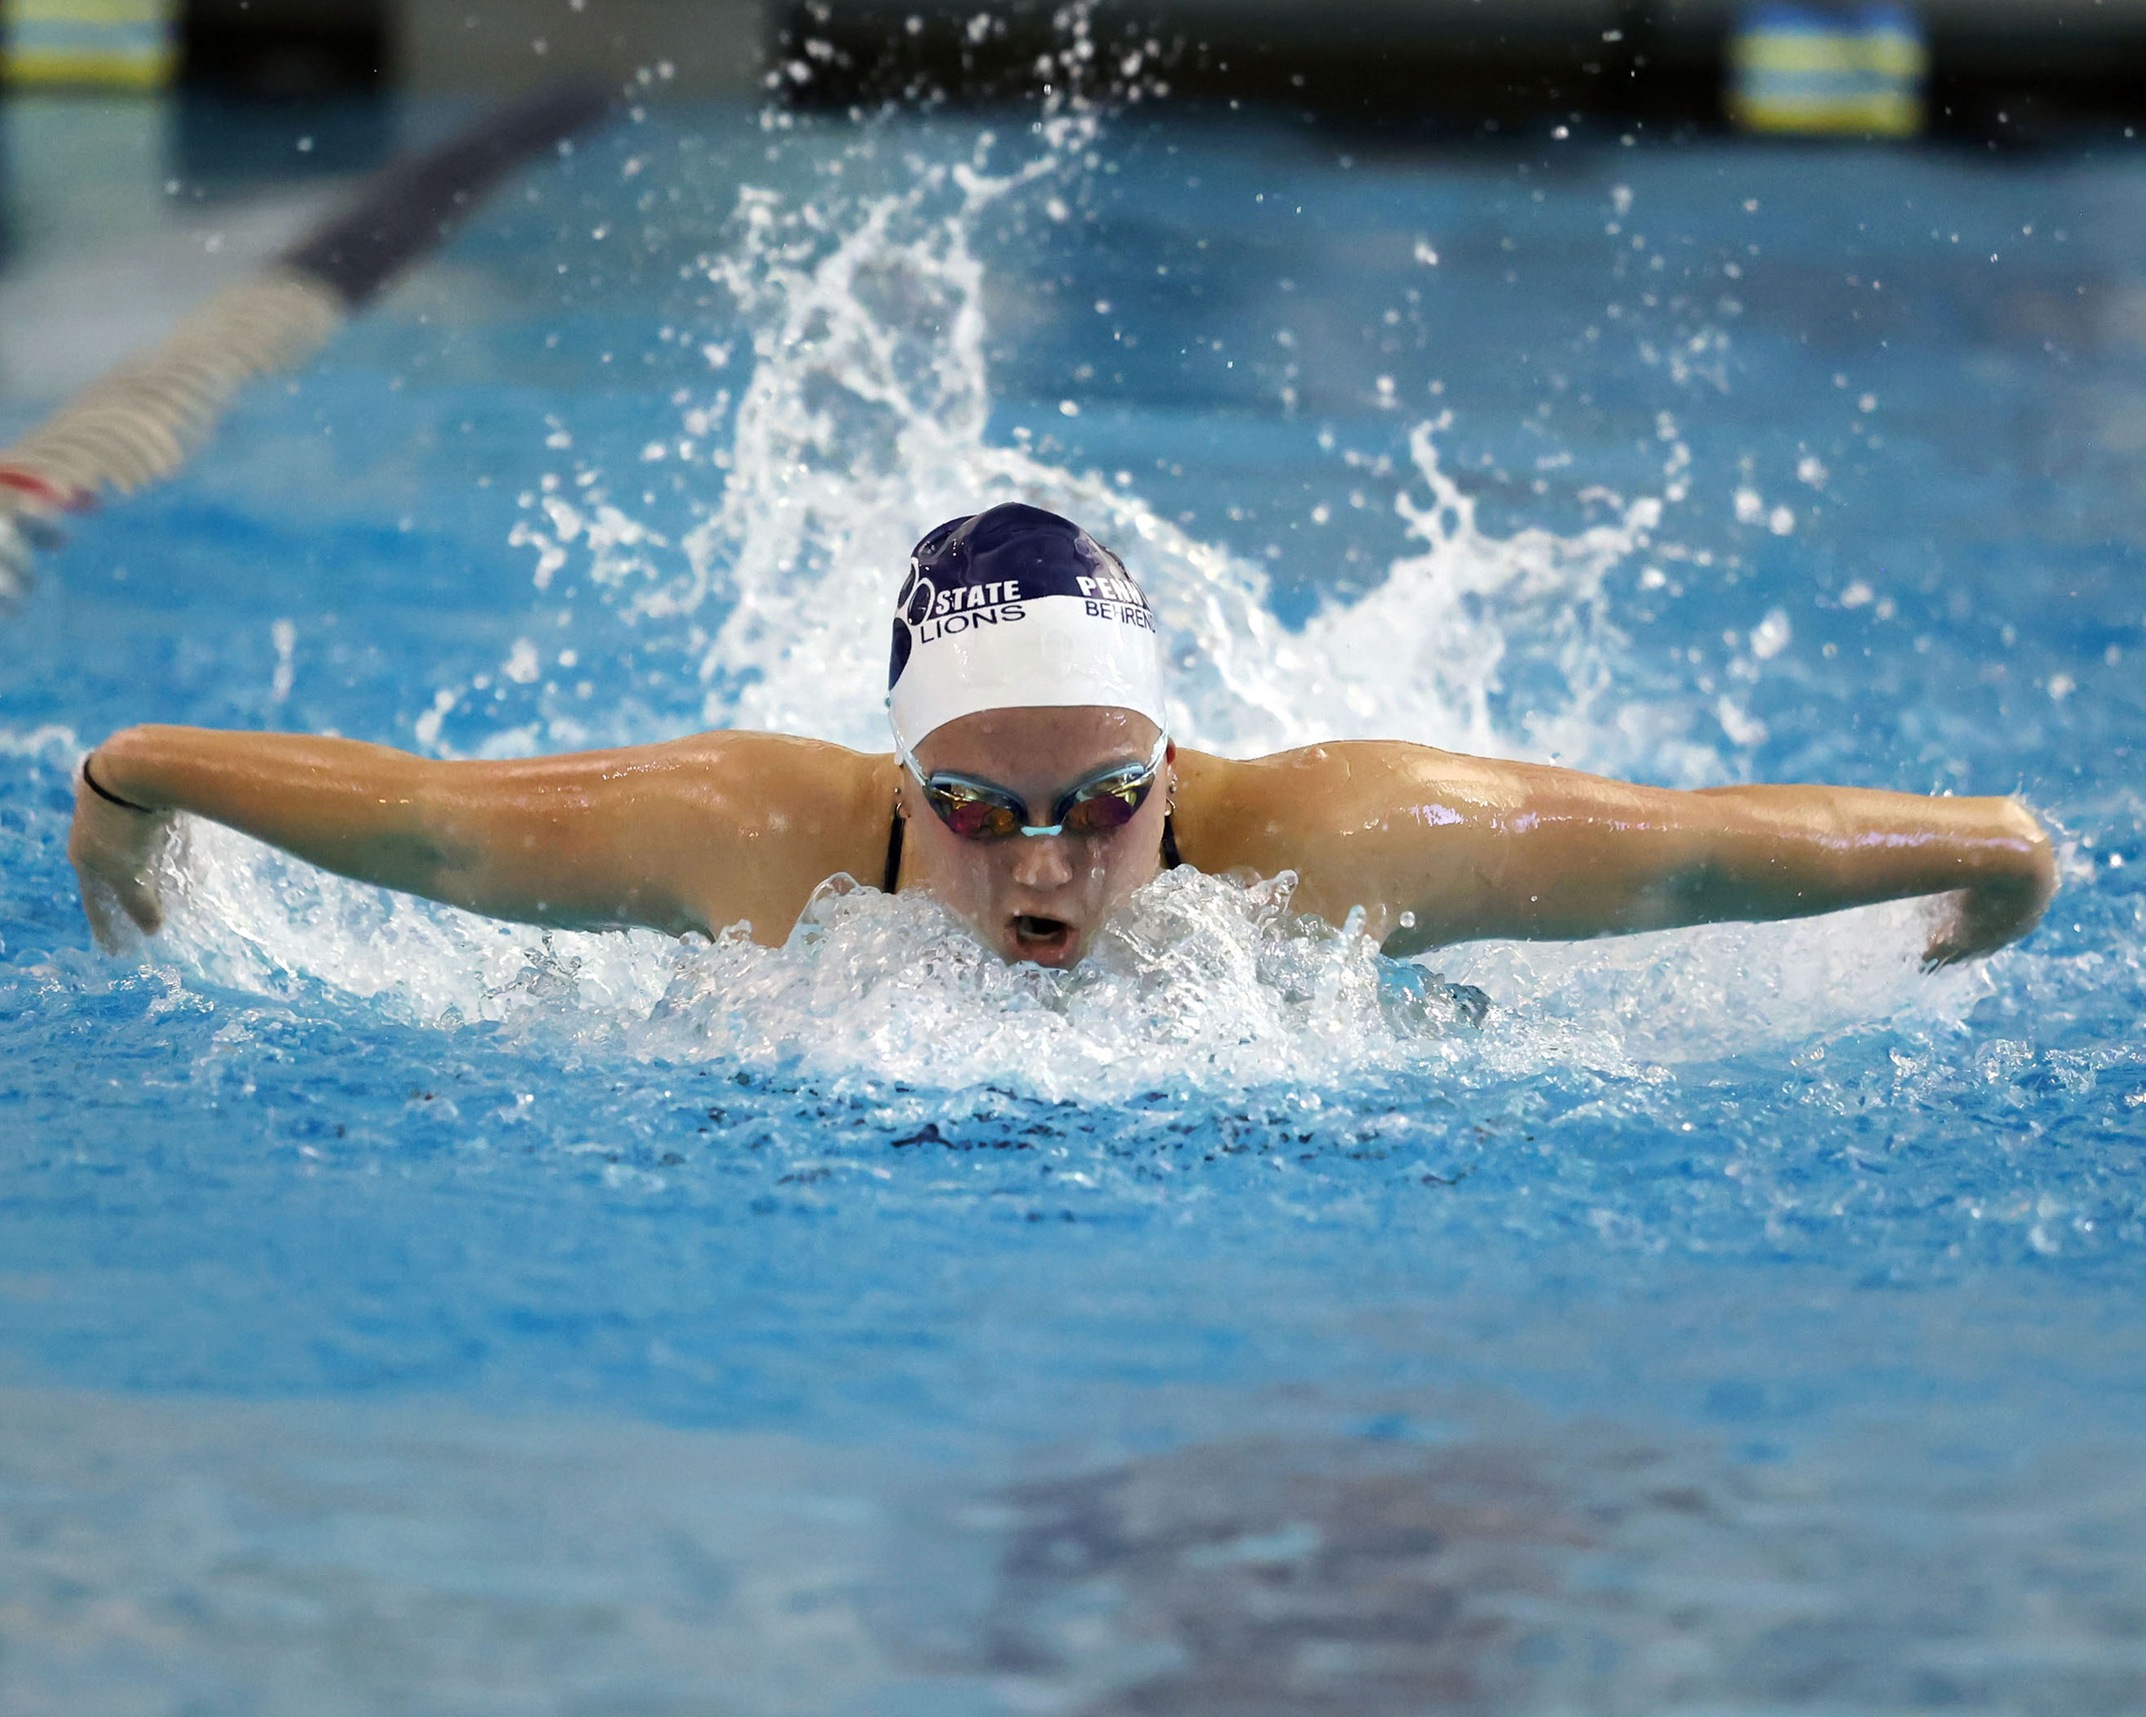 Penn State Altoona Narrowly Defeats Behrend Women's Swimming and Diving